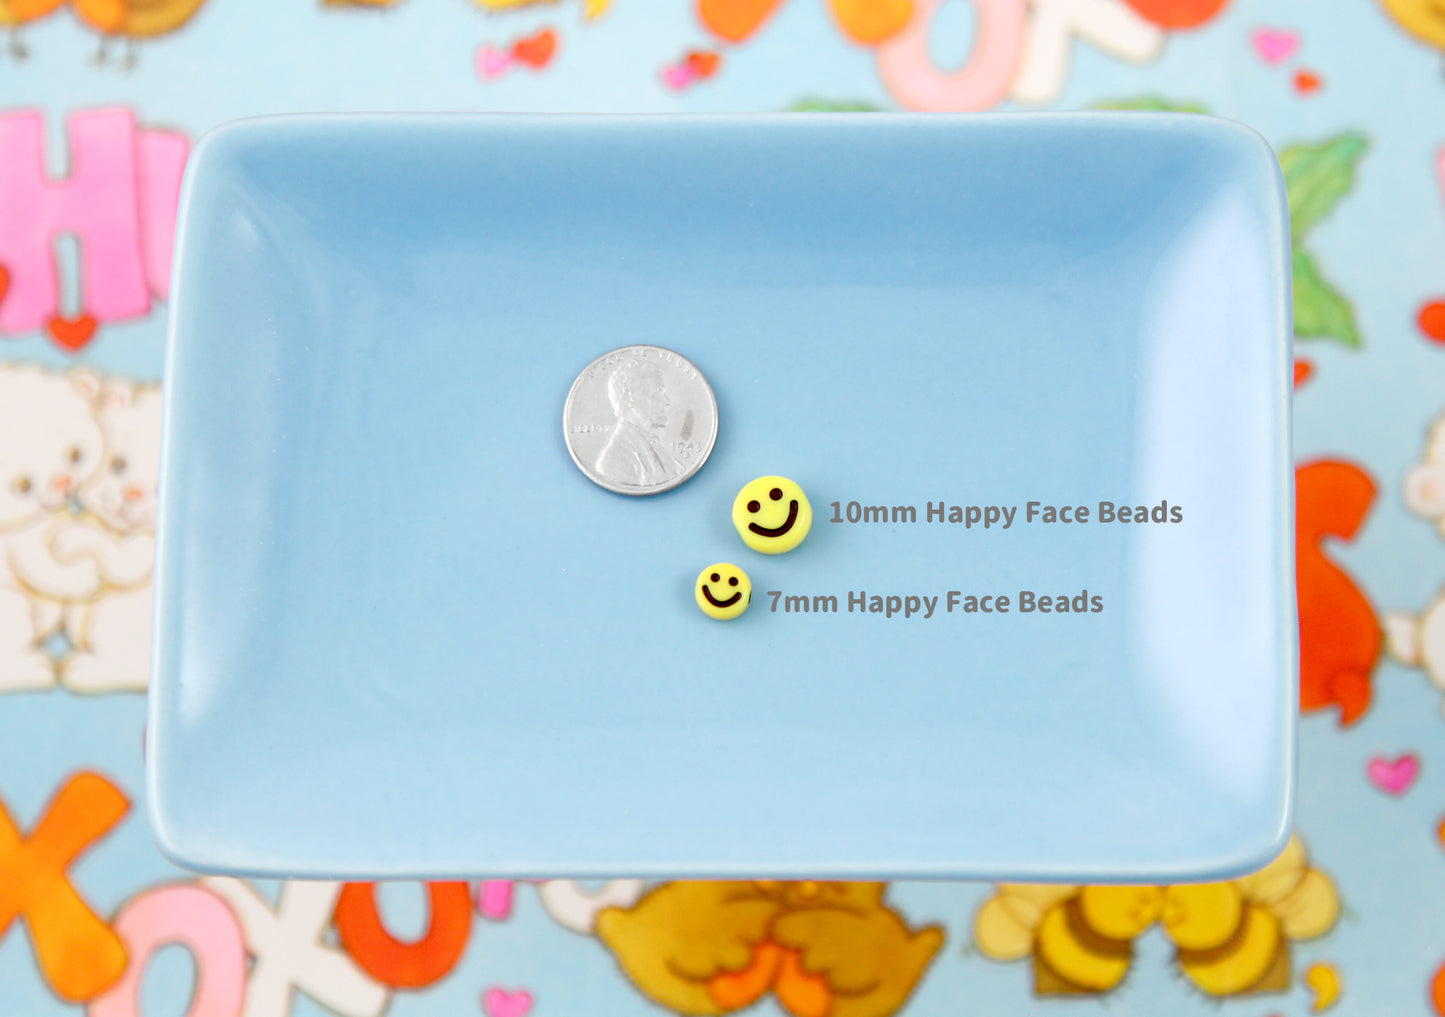 Happy Face Beads - 10mm Translucent Smile Shape Acrylic or Resin Beads - 100 pc set